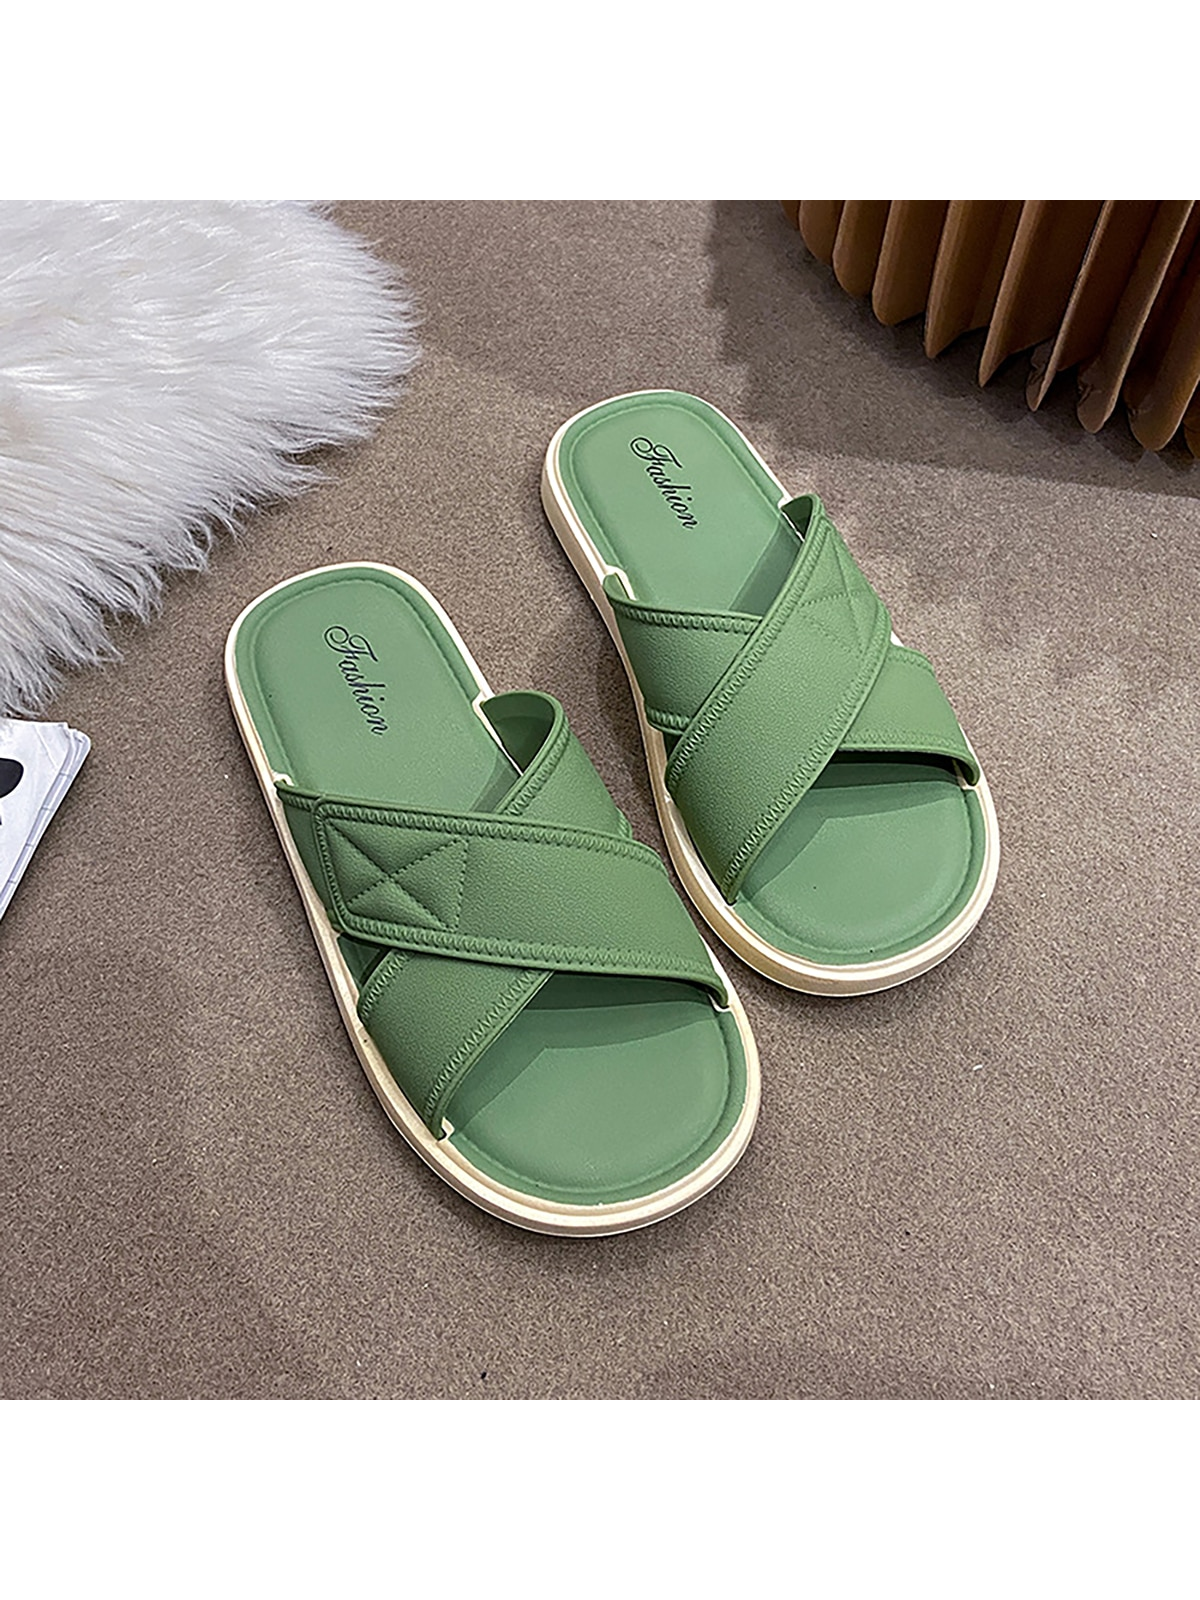 New Arrival Simple, Elegant And Versatile Slippers With Soft Pvc Outsole For Anti-Slip On The Beach And In Home Bathroom - Suitable For Indoor And Outdoor Wear, Giving You A Chic And Fresh Ins Look-Green-5